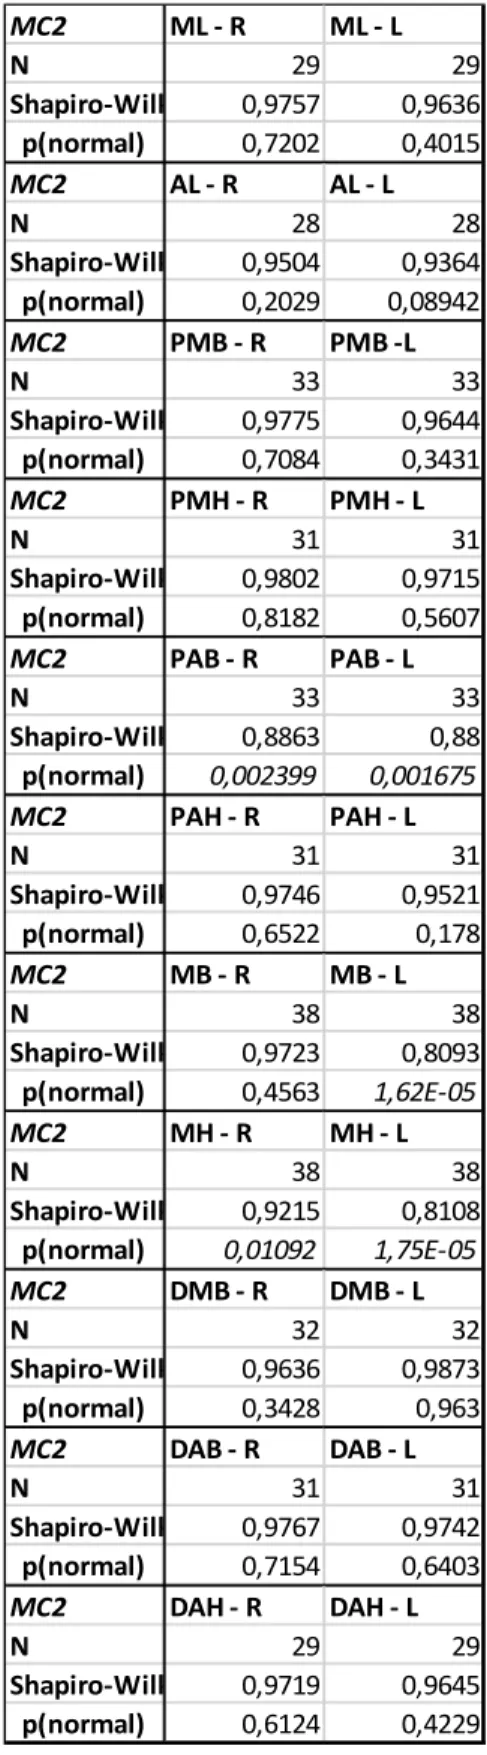 Table 17. Normality test of Shapiro -Wilk for  all the right (R) and left (L) of MC2, by 